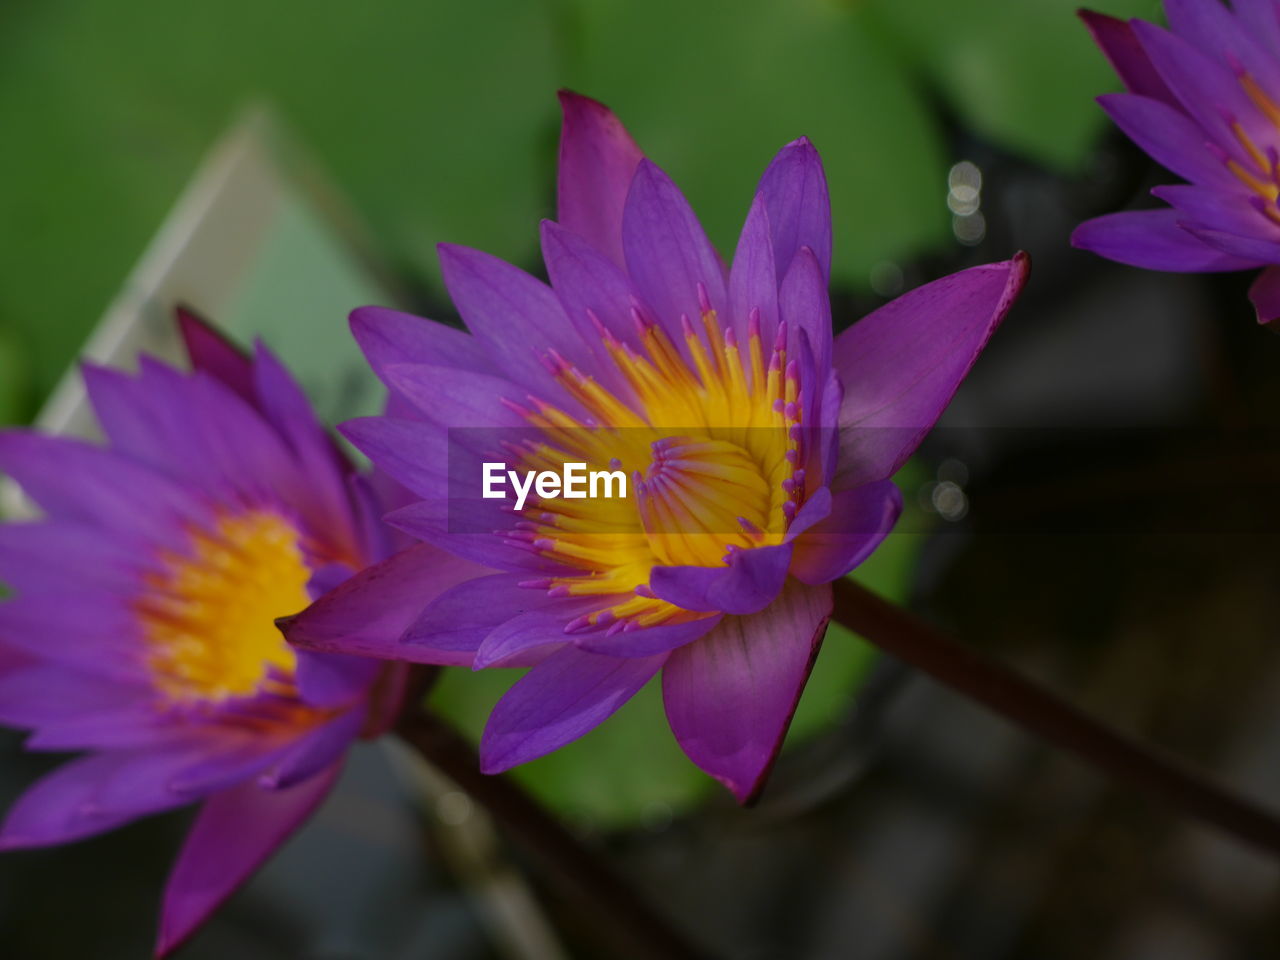 flower, flowering plant, plant, freshness, beauty in nature, petal, close-up, fragility, flower head, macro photography, inflorescence, purple, nature, growth, yellow, focus on foreground, no people, pollen, pink, water, water lily, outdoors, blossom, springtime, magenta, vibrant color, day, leaf, botany